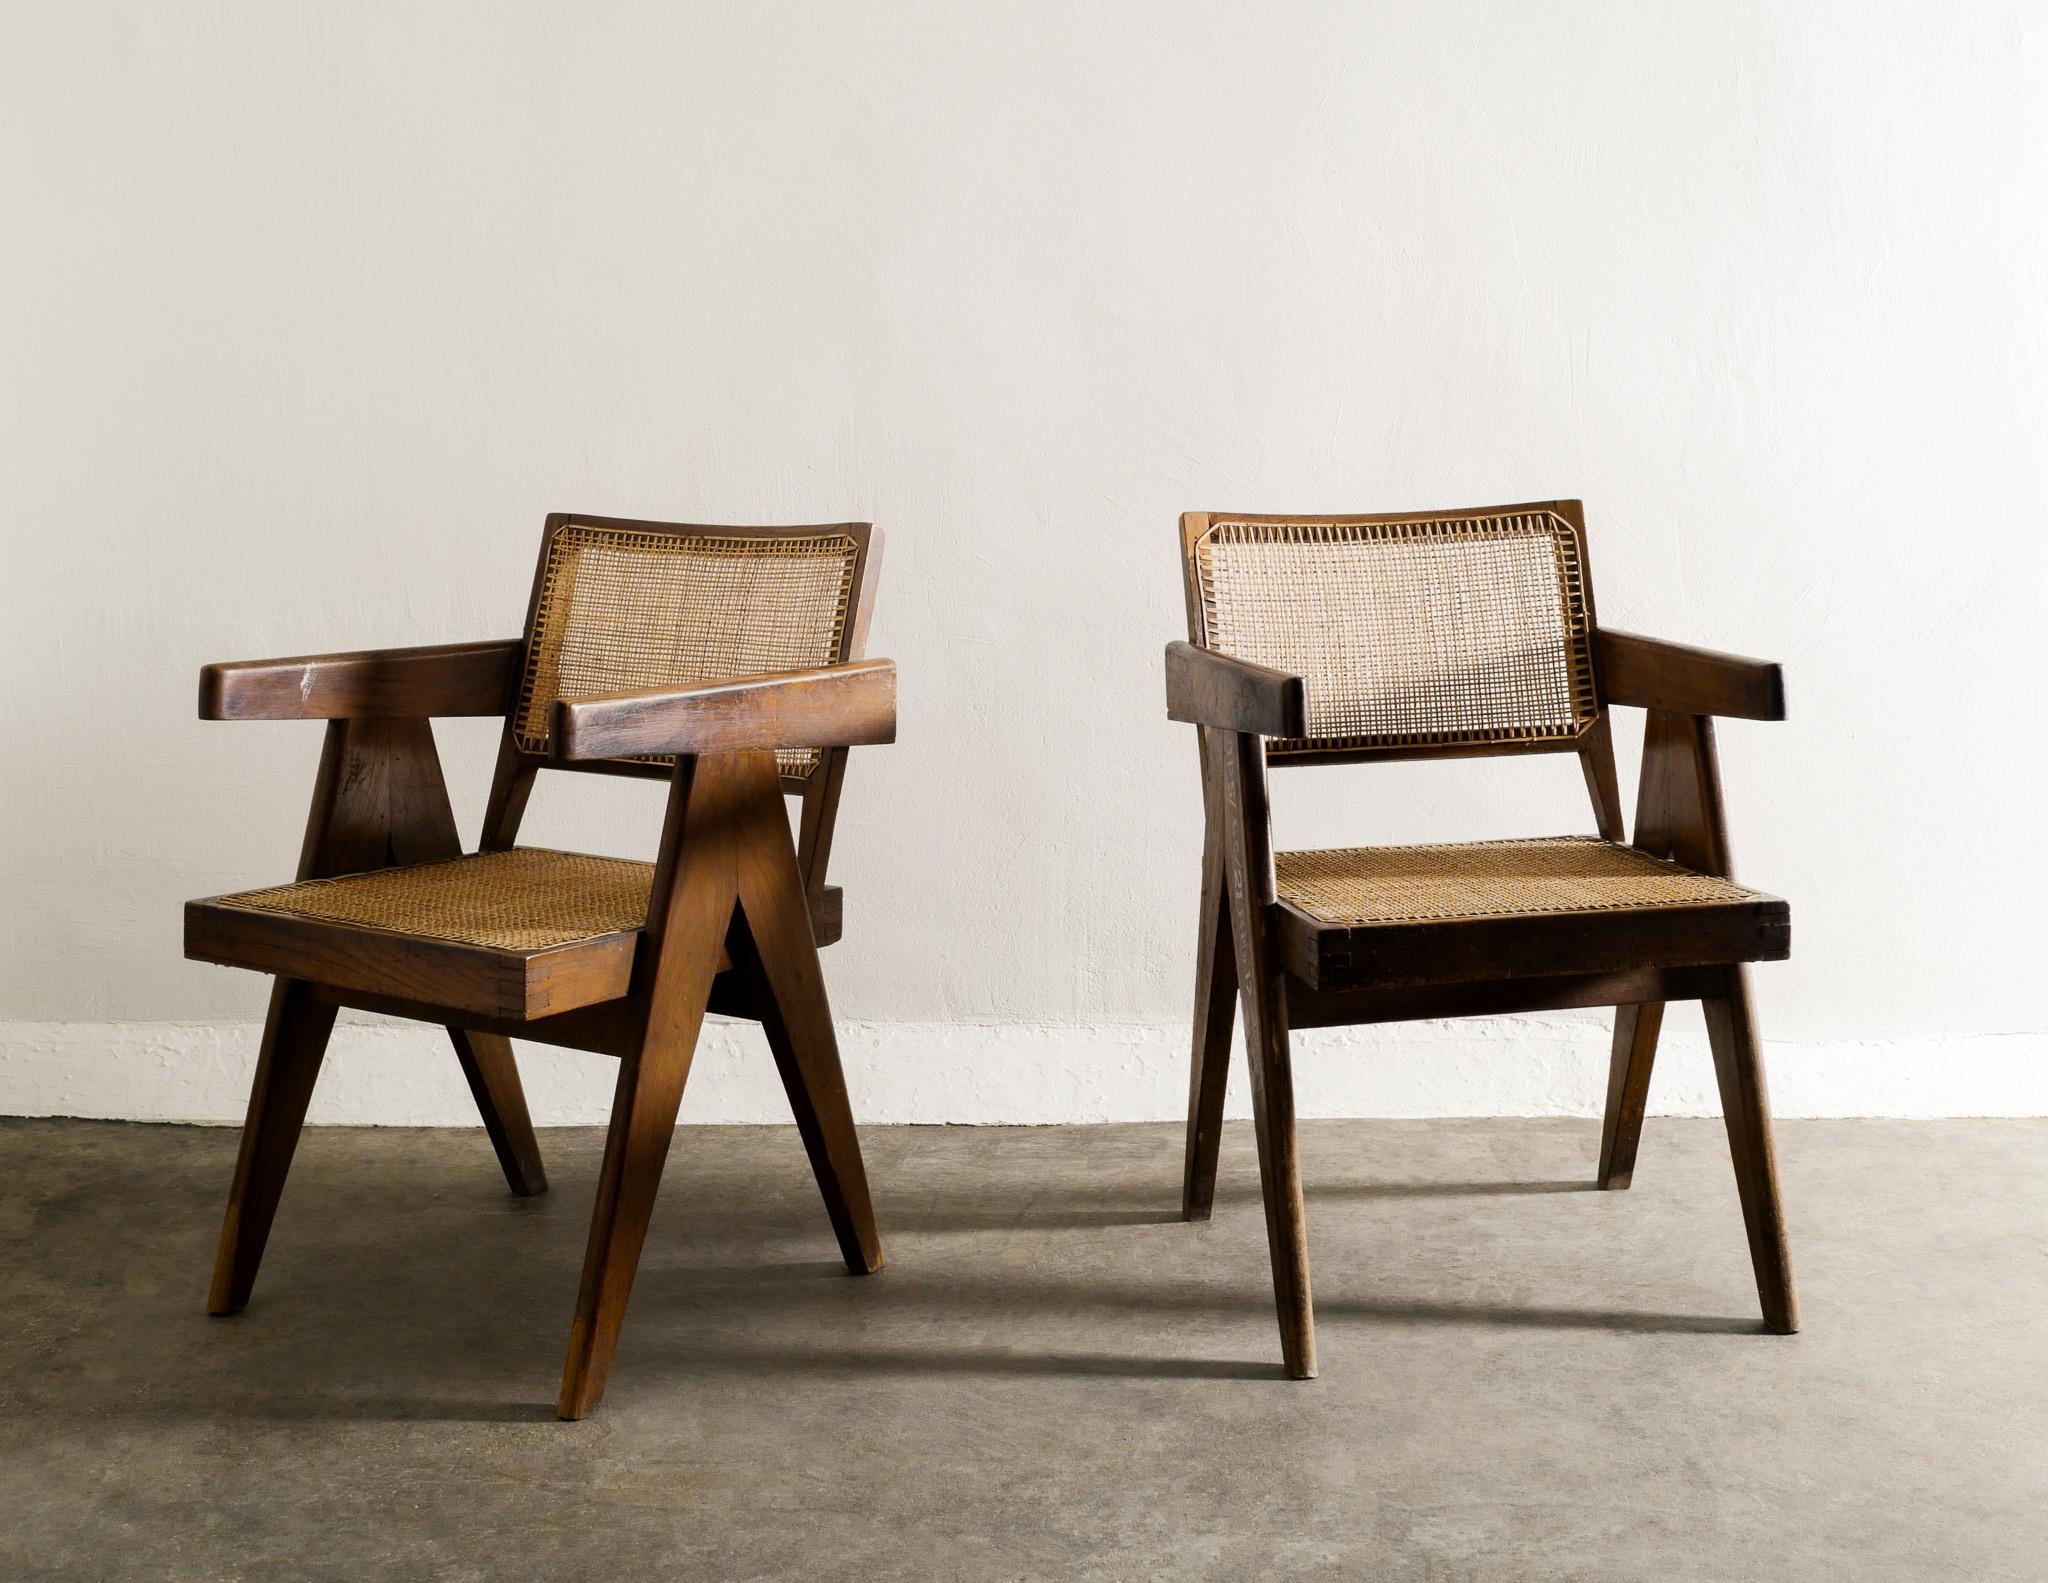 Very rare pair matching of mid century office / dining chairs by Pierre Jeanneret in teak and rattan. Great condition and patina with nice letterings. 
Produced for the Chandigarh project in India during the 1950s. 

Dimensions: H: 79 cm / 31.1